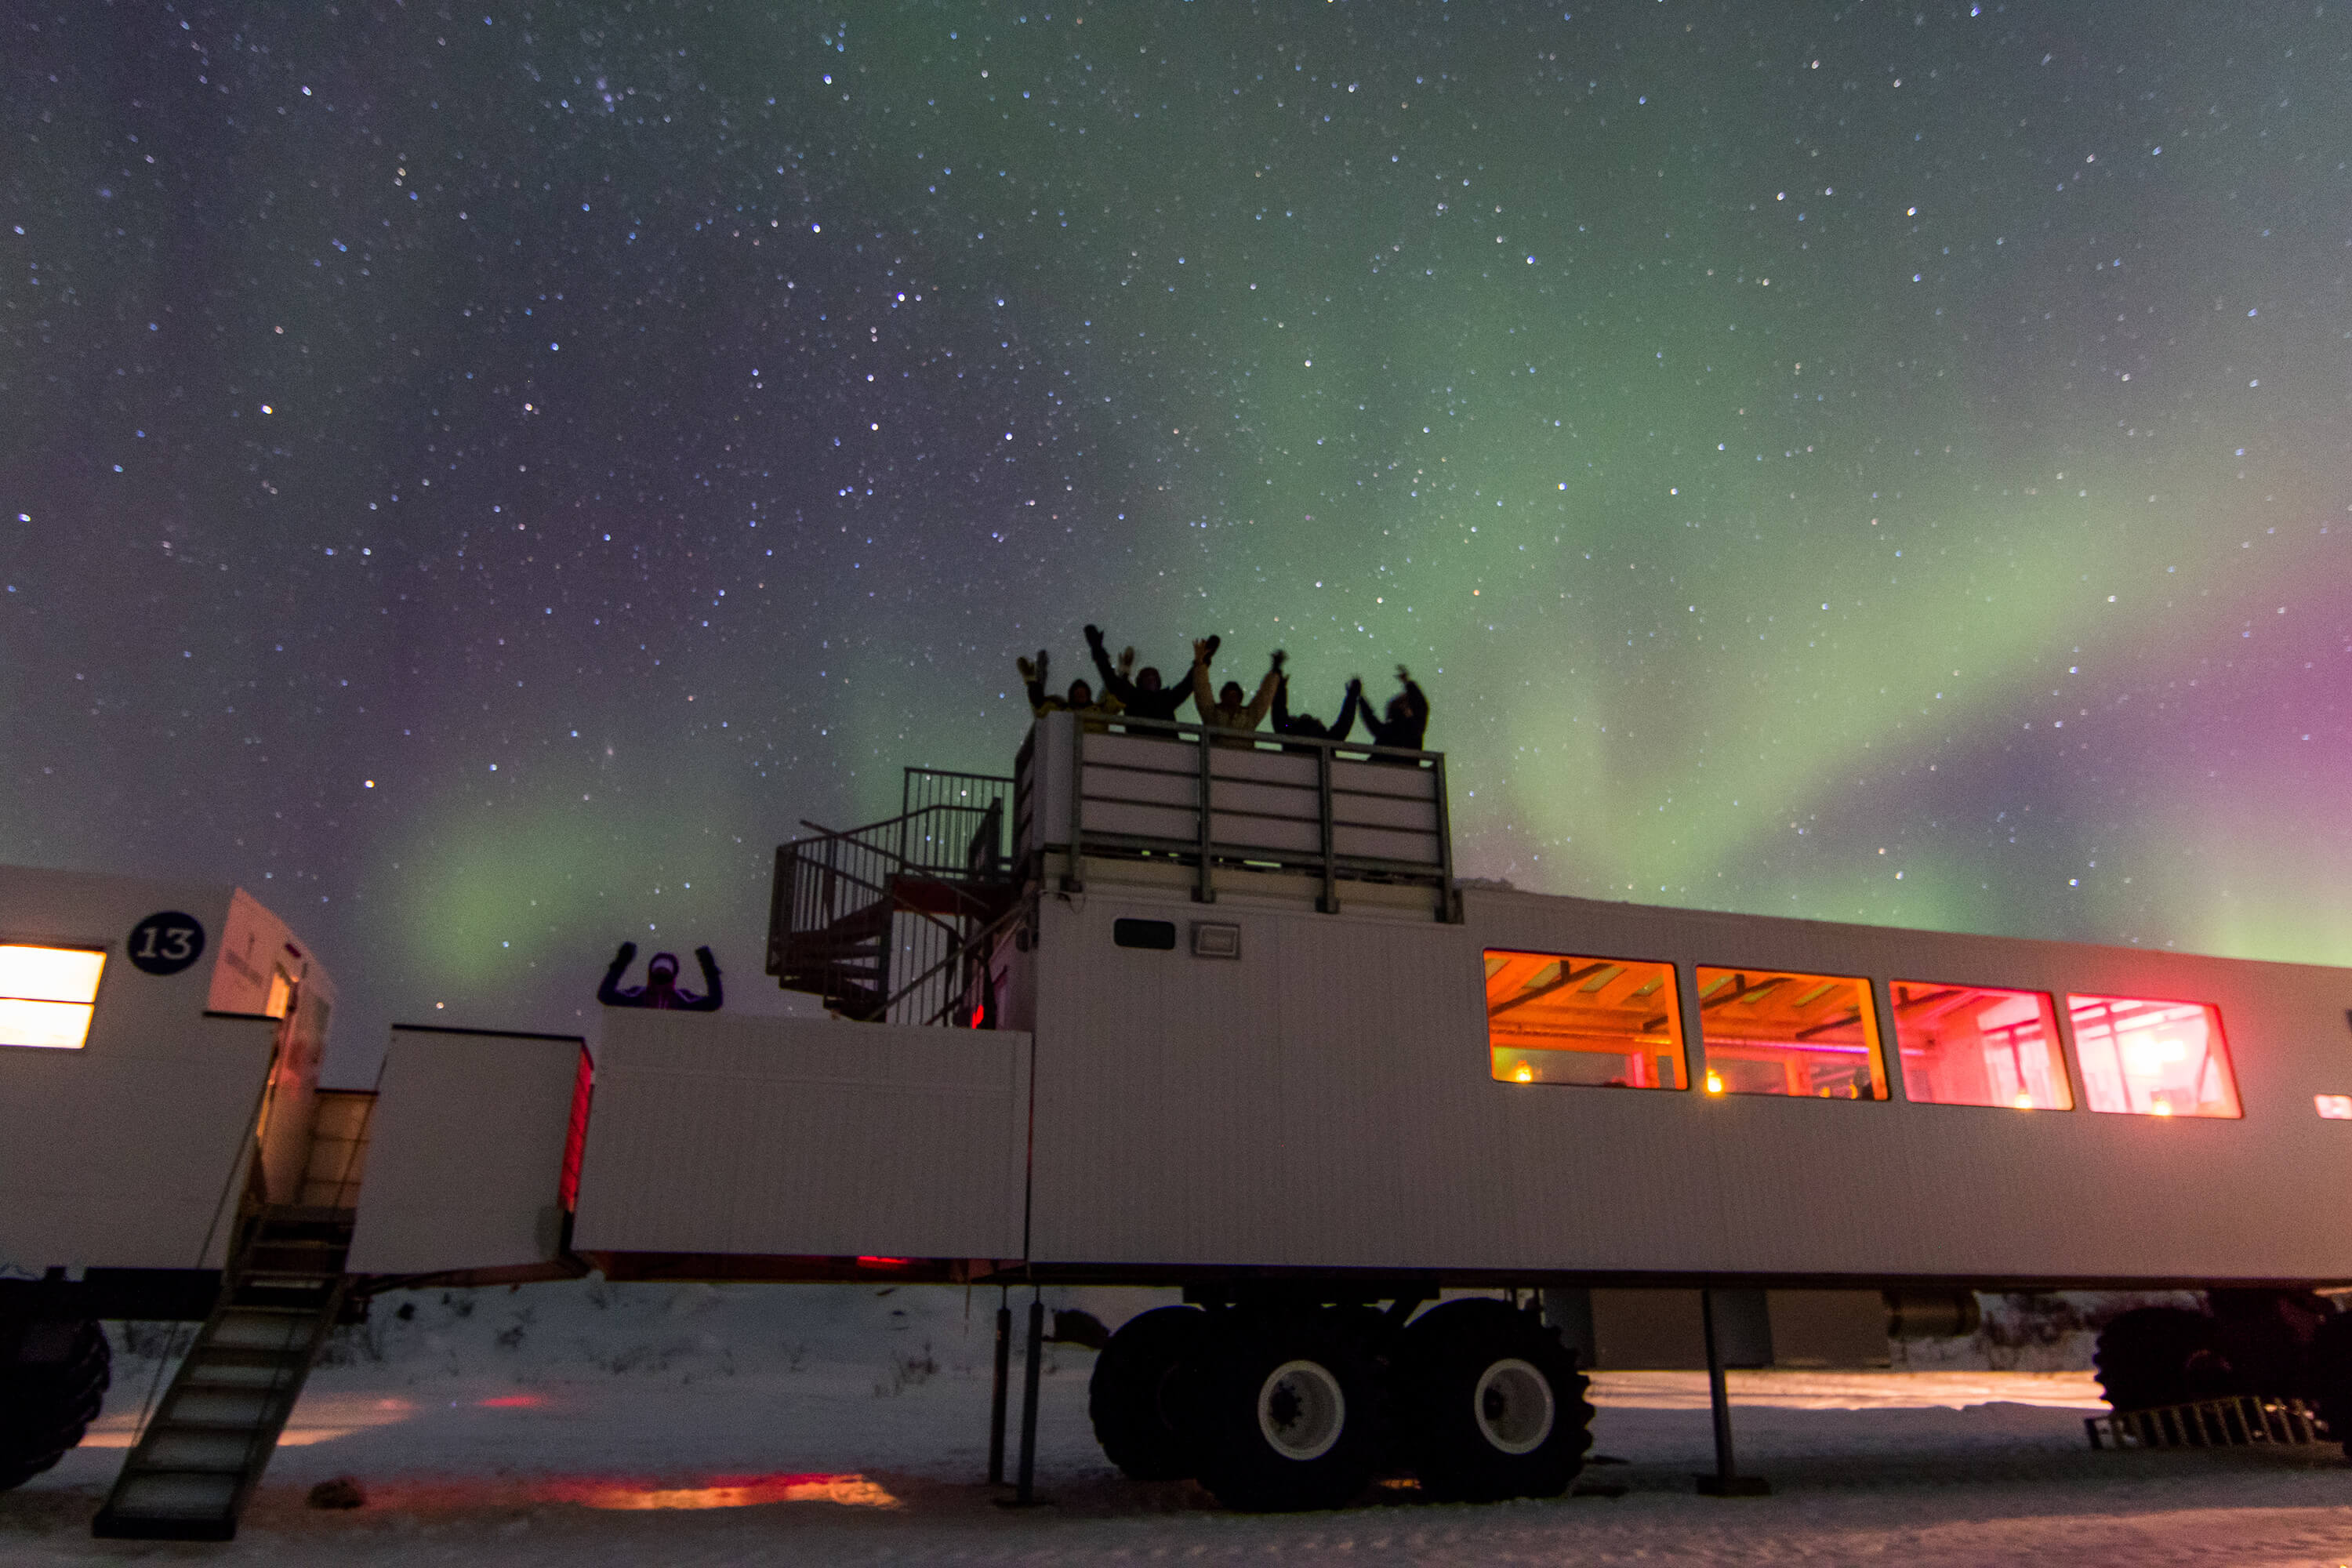 The northern lights above the Thanadelthur Lounge rooftop observation deck